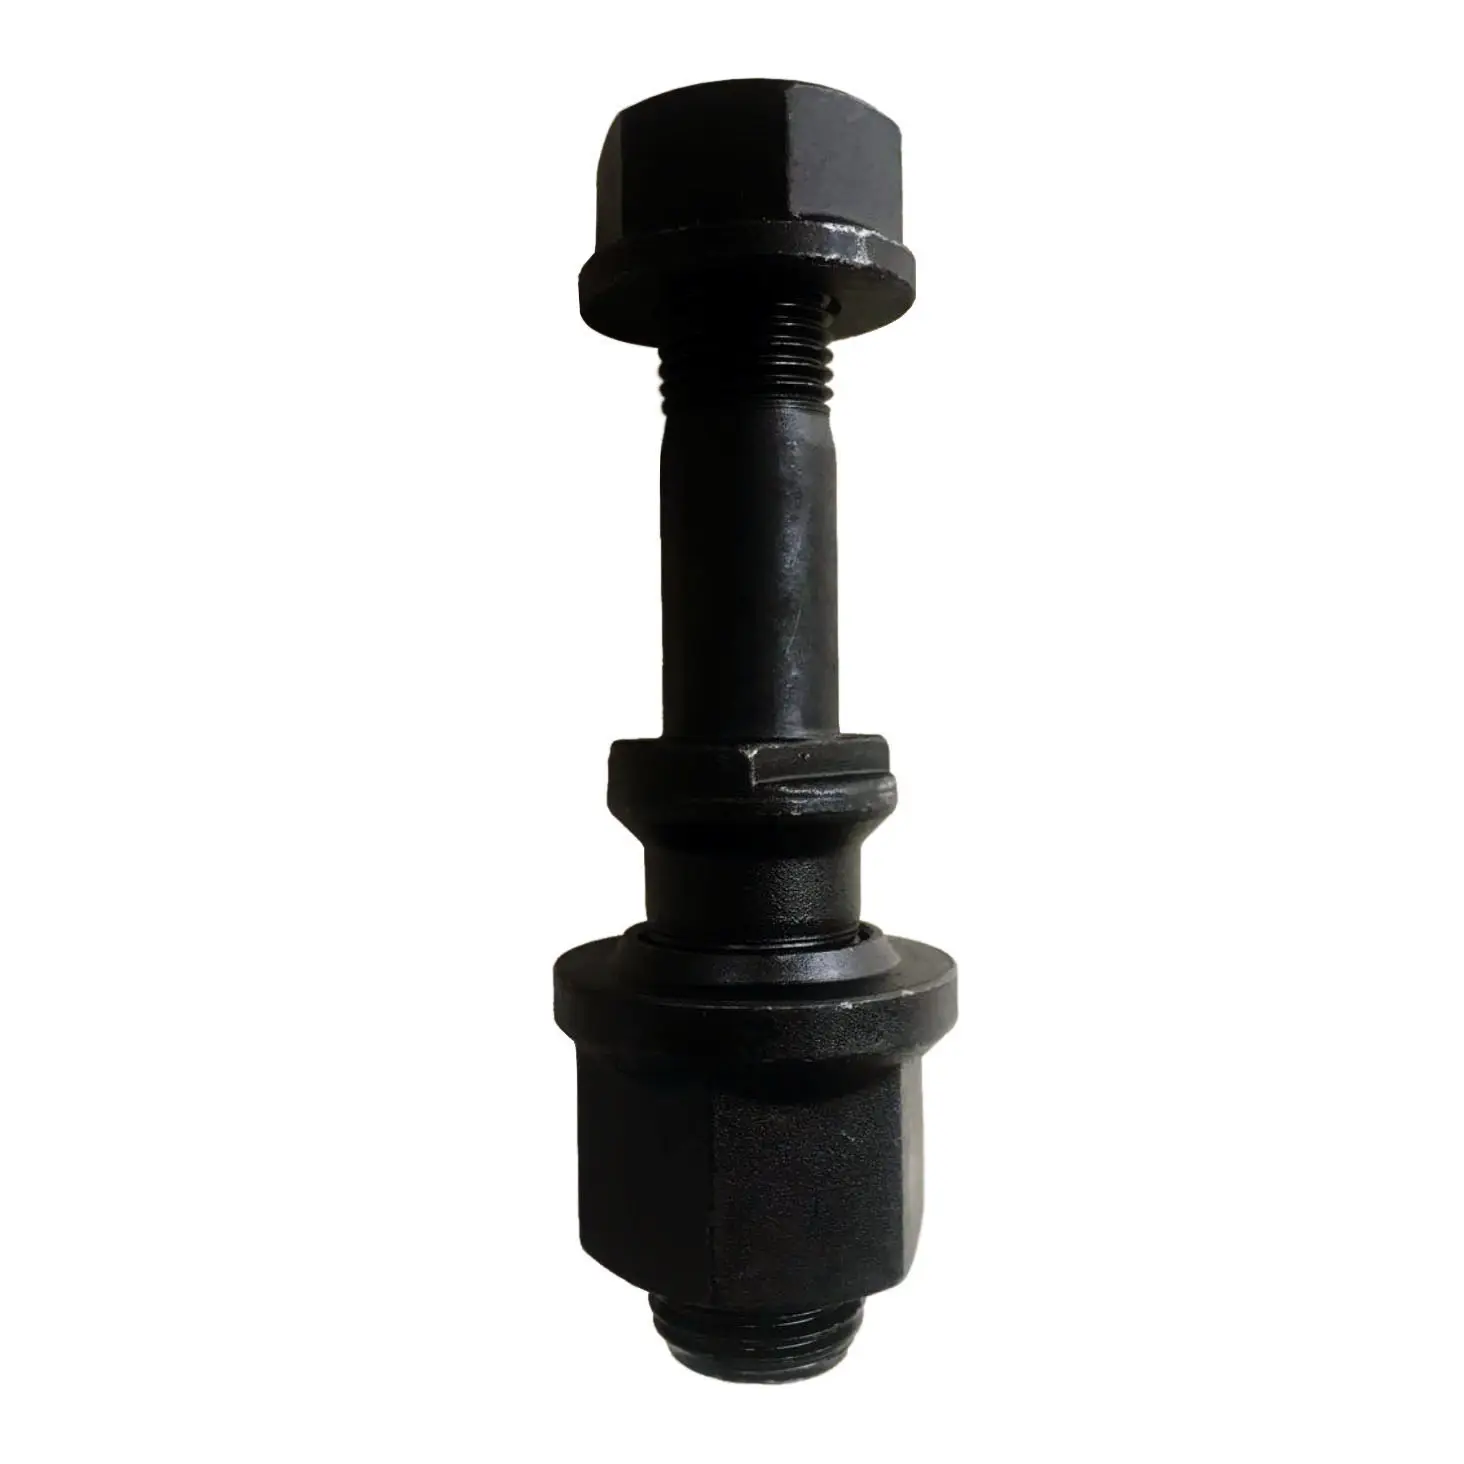 Fuhua 16T/13T Wheel Stud For Trailer High Quality Hub Bolt And Nut For Semi-Truck Spare Parts